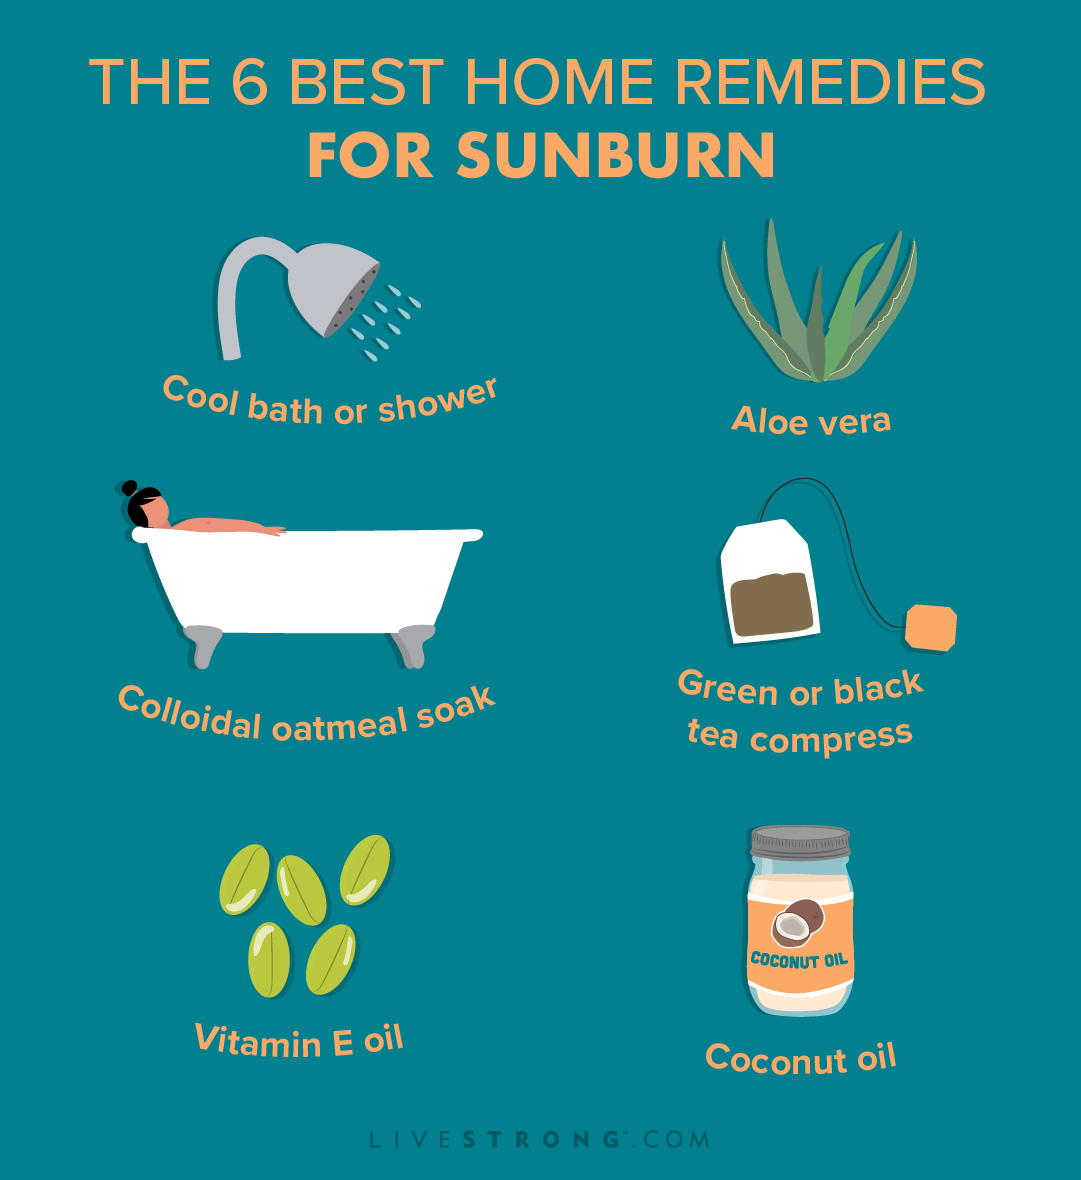 The 6 Best Natural Remedies for Sunburn, According to a Doctor